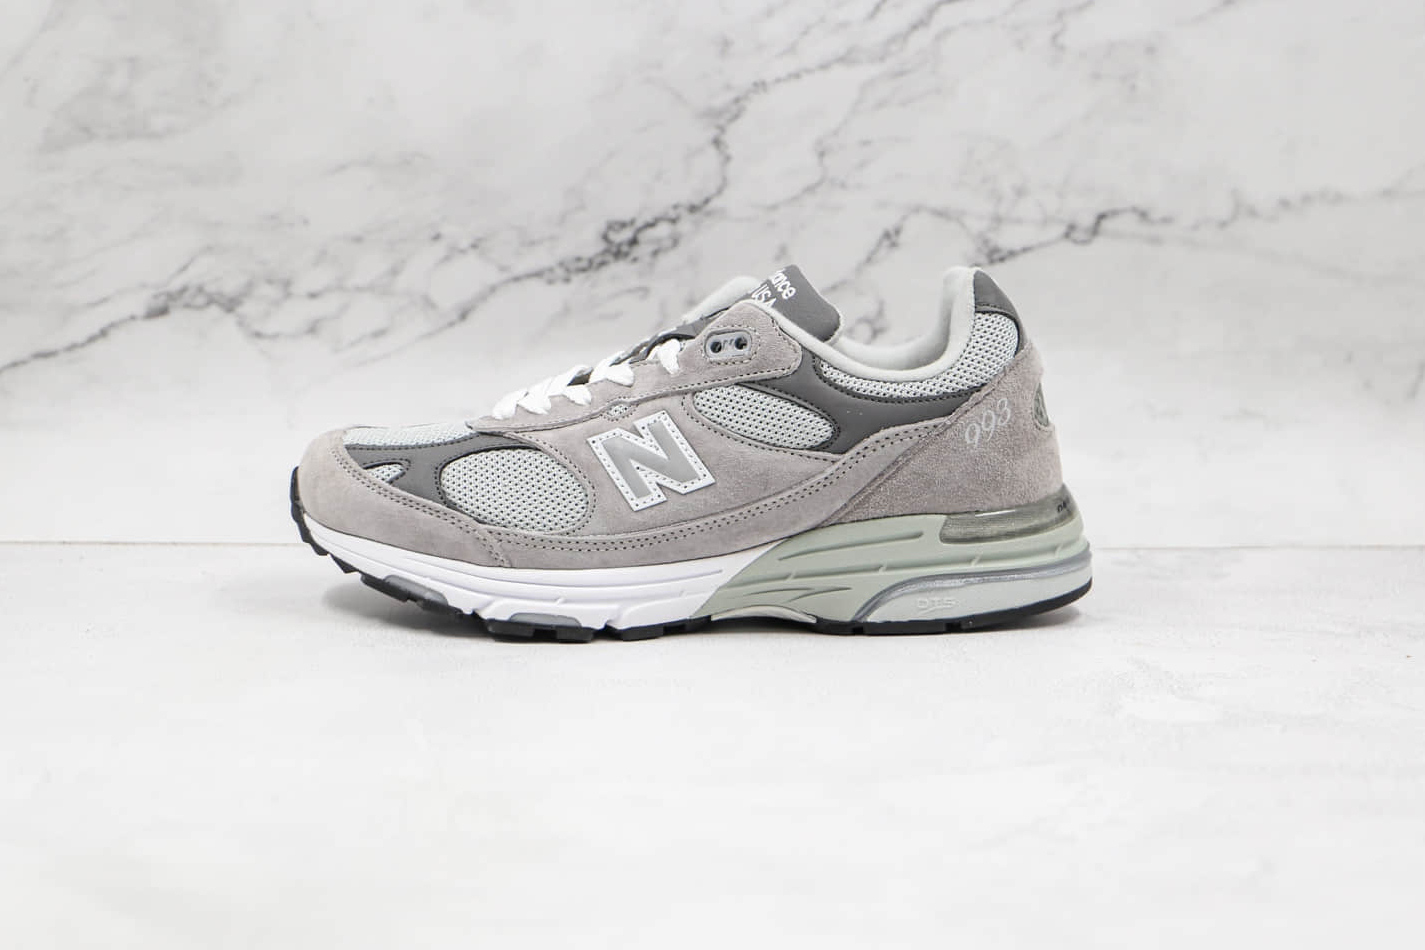 New Balance 993 Made in USA Grey White MR993GL - Premium Quality Athletic Shoes